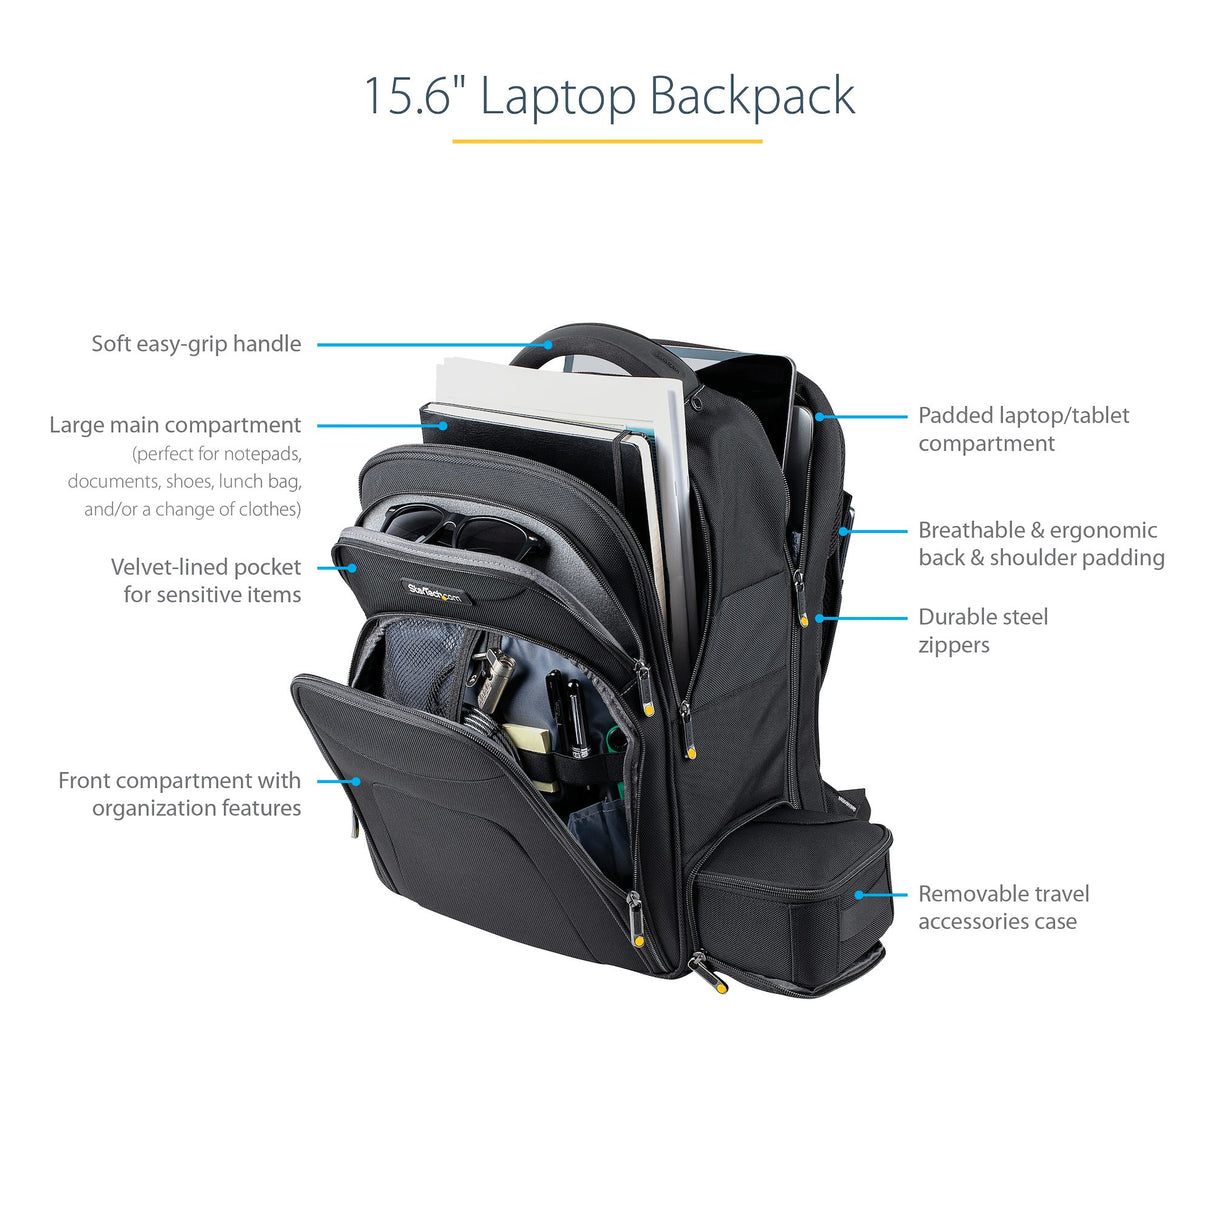 STARTECH 15.6" Laptop Backpack with Removable Accessory Case - Professional IT Tech Backpack for Work|Travel|Commute - Durable Ergonomic Computer Bag - Nylon - Notebook|Tablet Pockets (NTBKBAG156) (NTBKBAG156) STARTECH